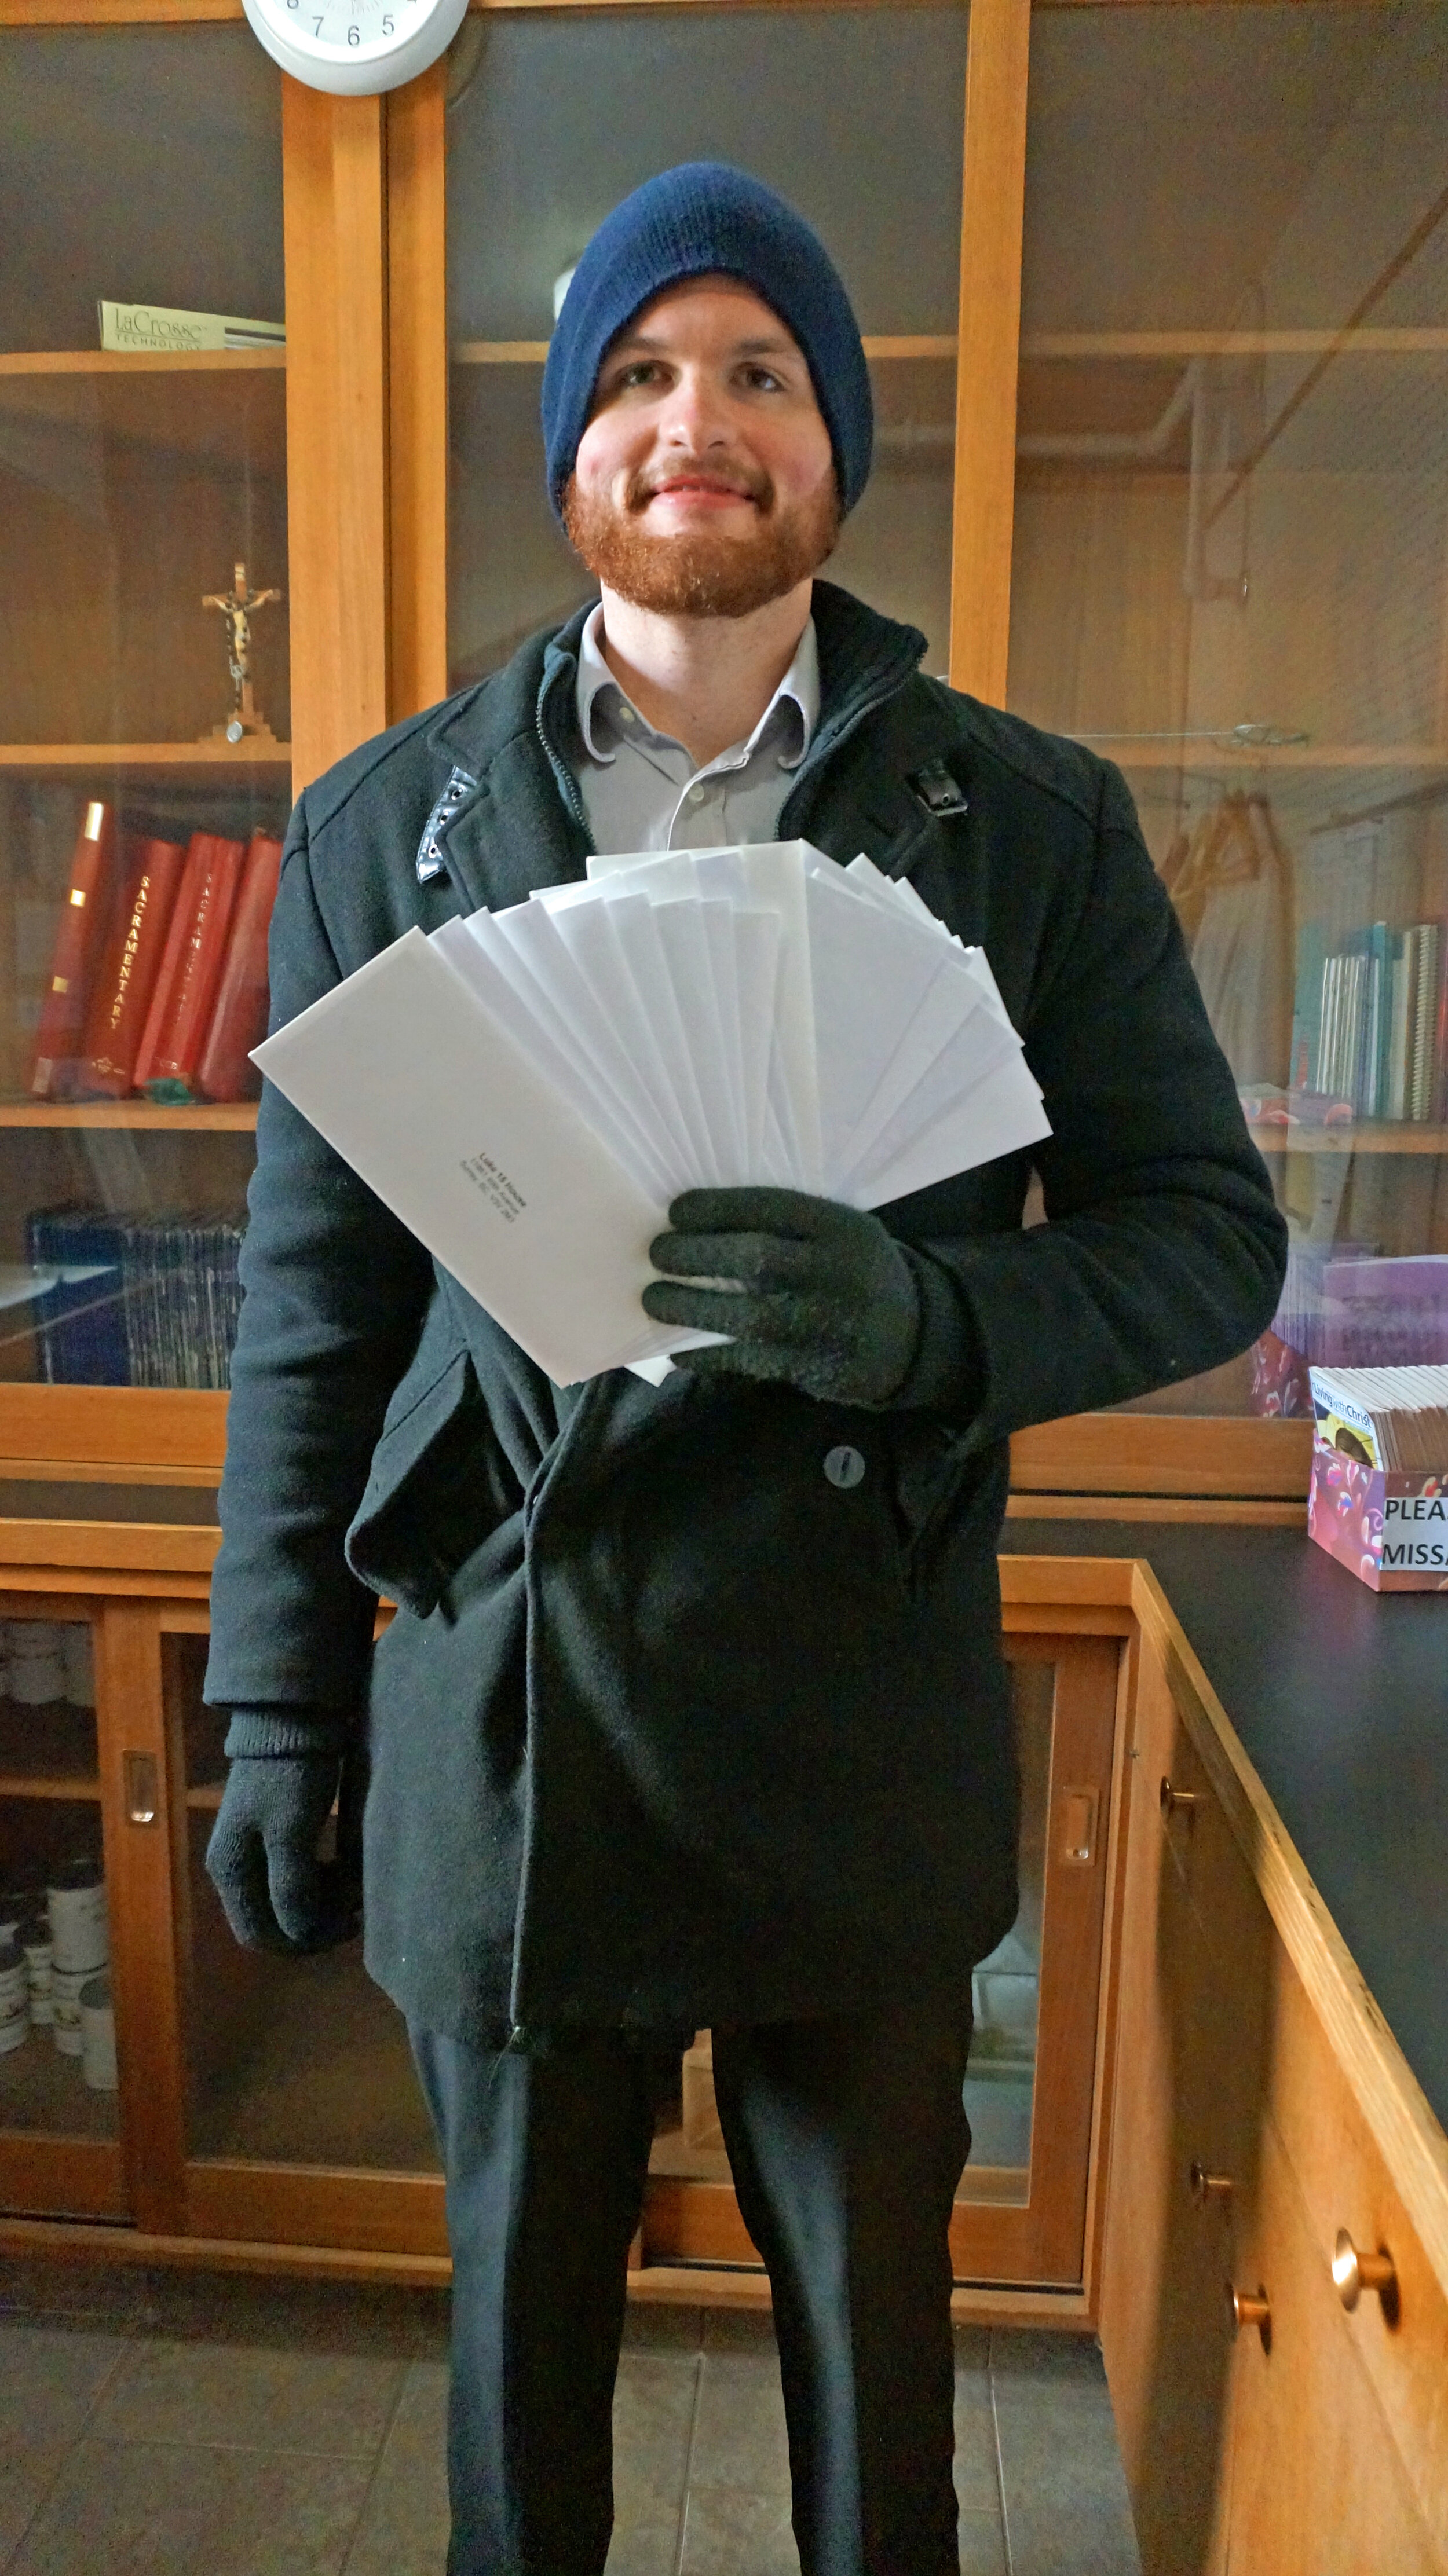 Copy of Danny with envelopes.jpg